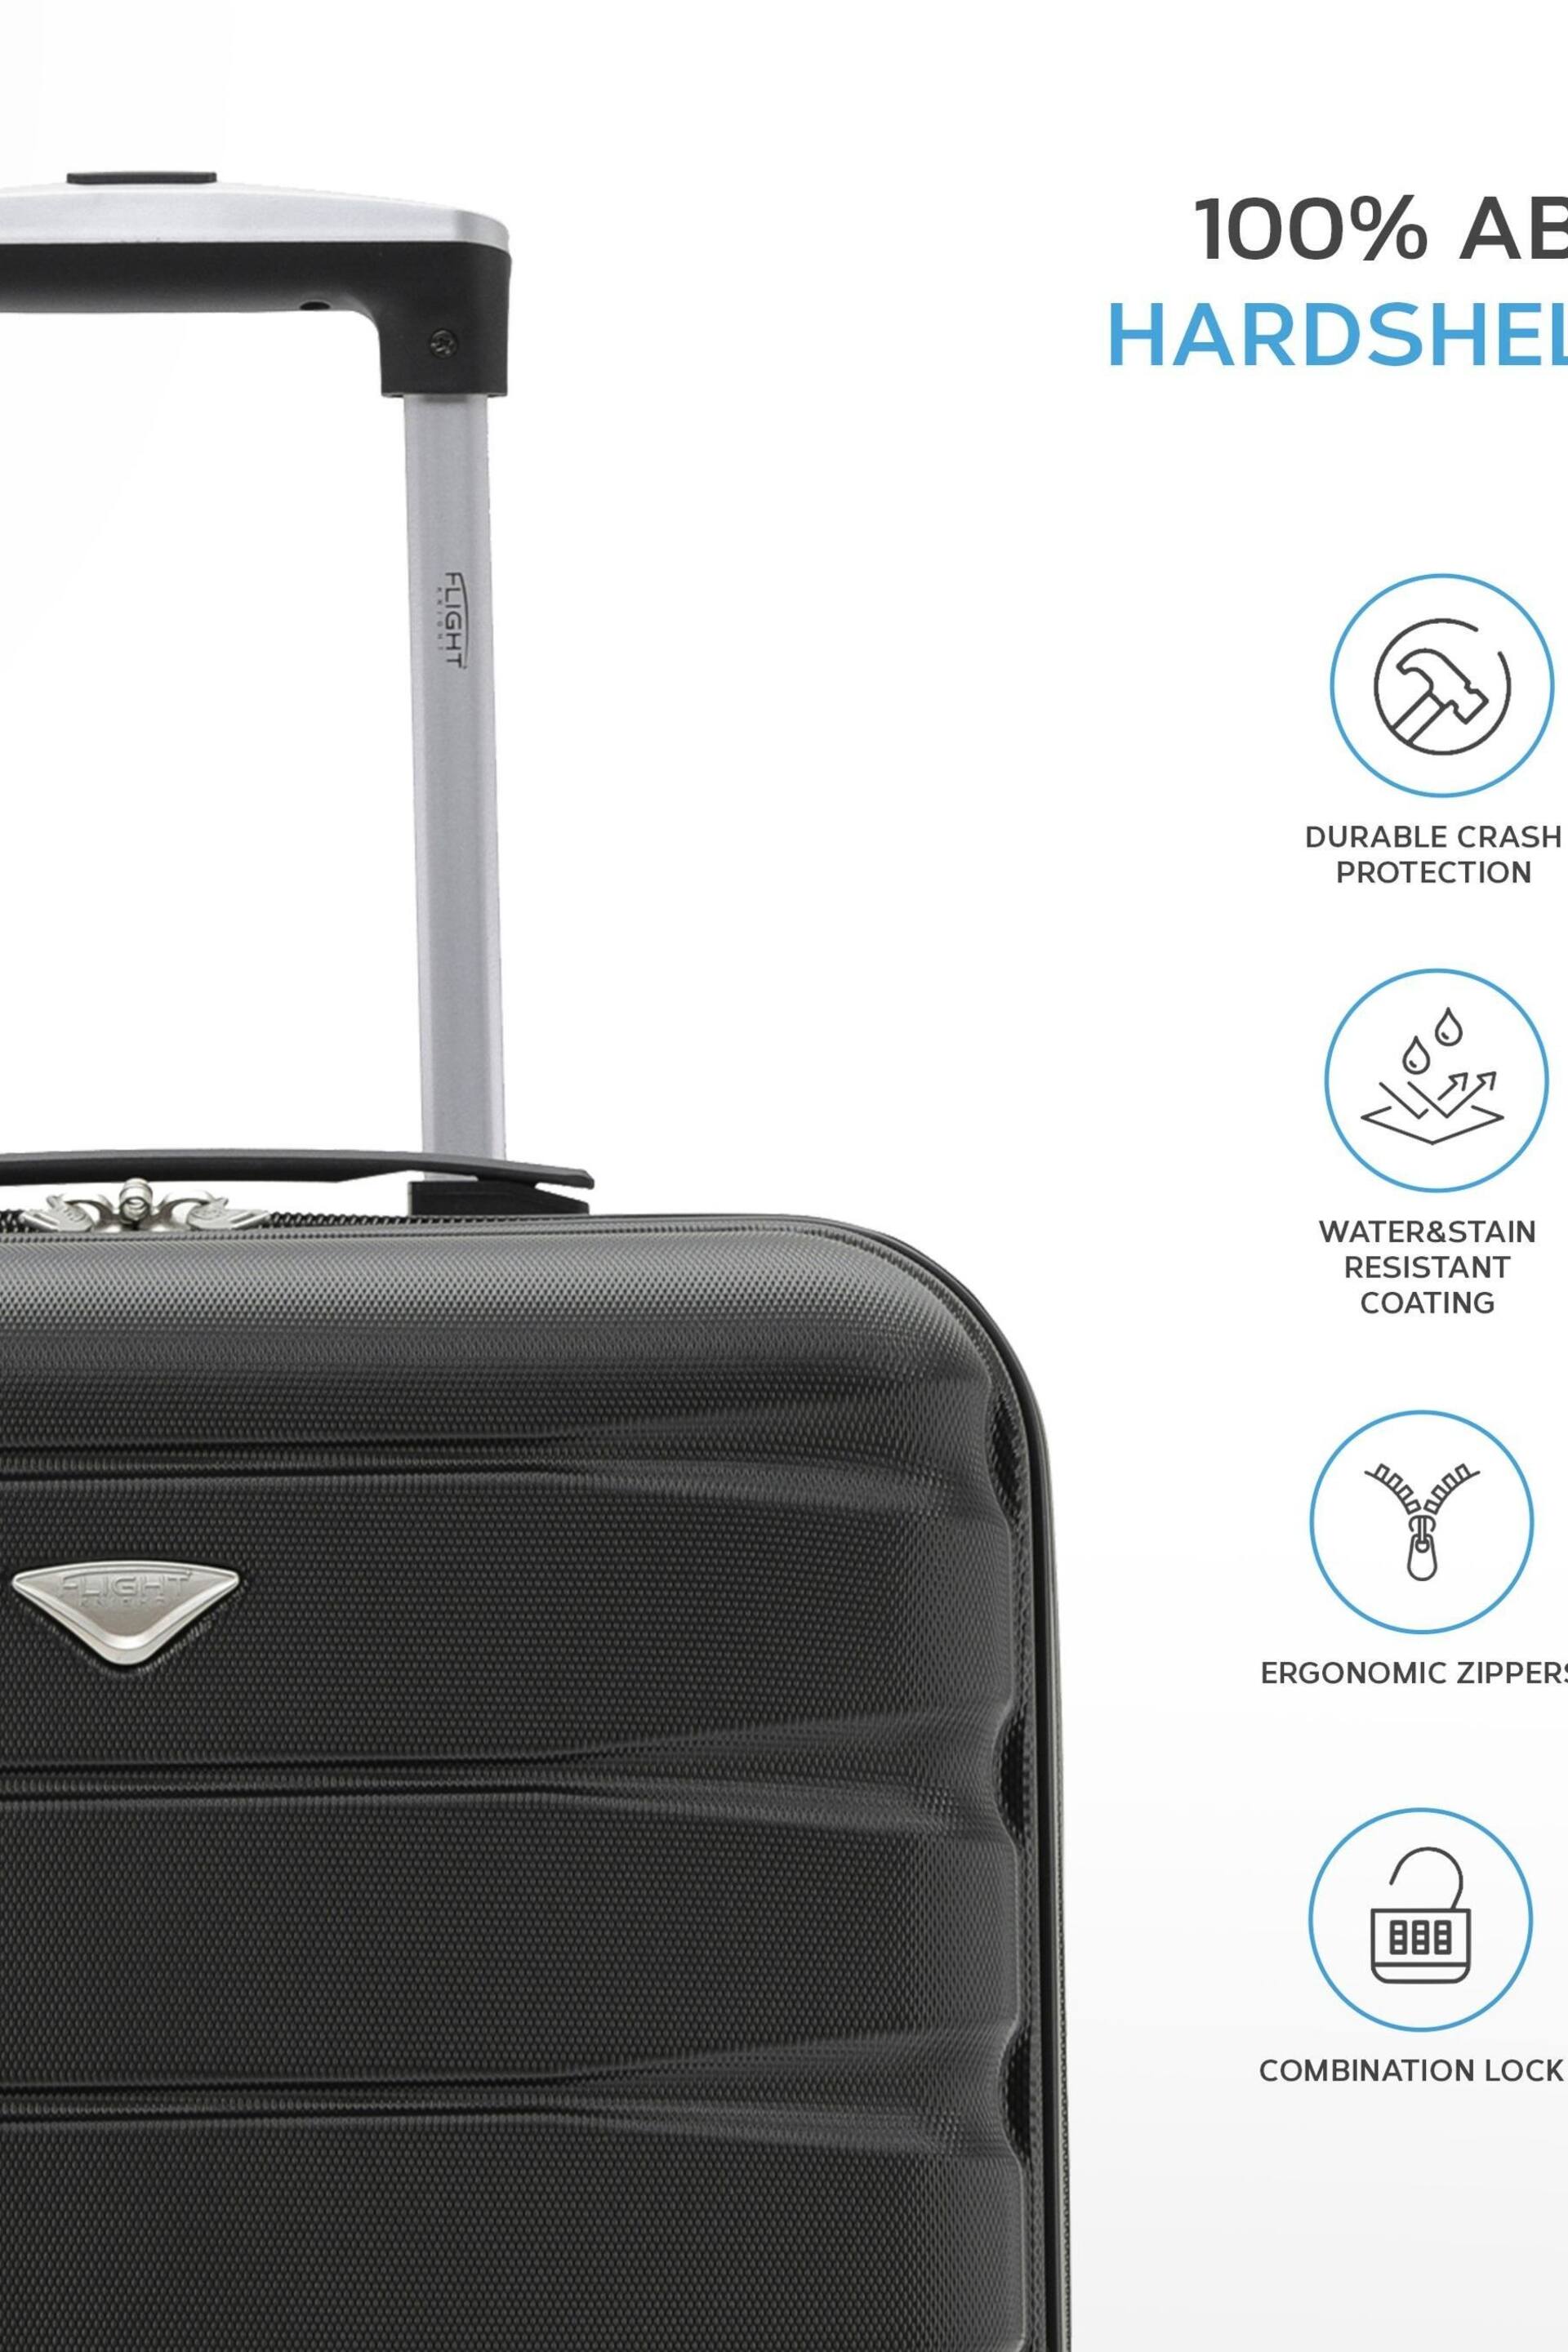 Flight Knight 55x40x23cm 4 Wheel ABS Hard Case Cabin Carry On Hand Black Luggage - Image 3 of 7